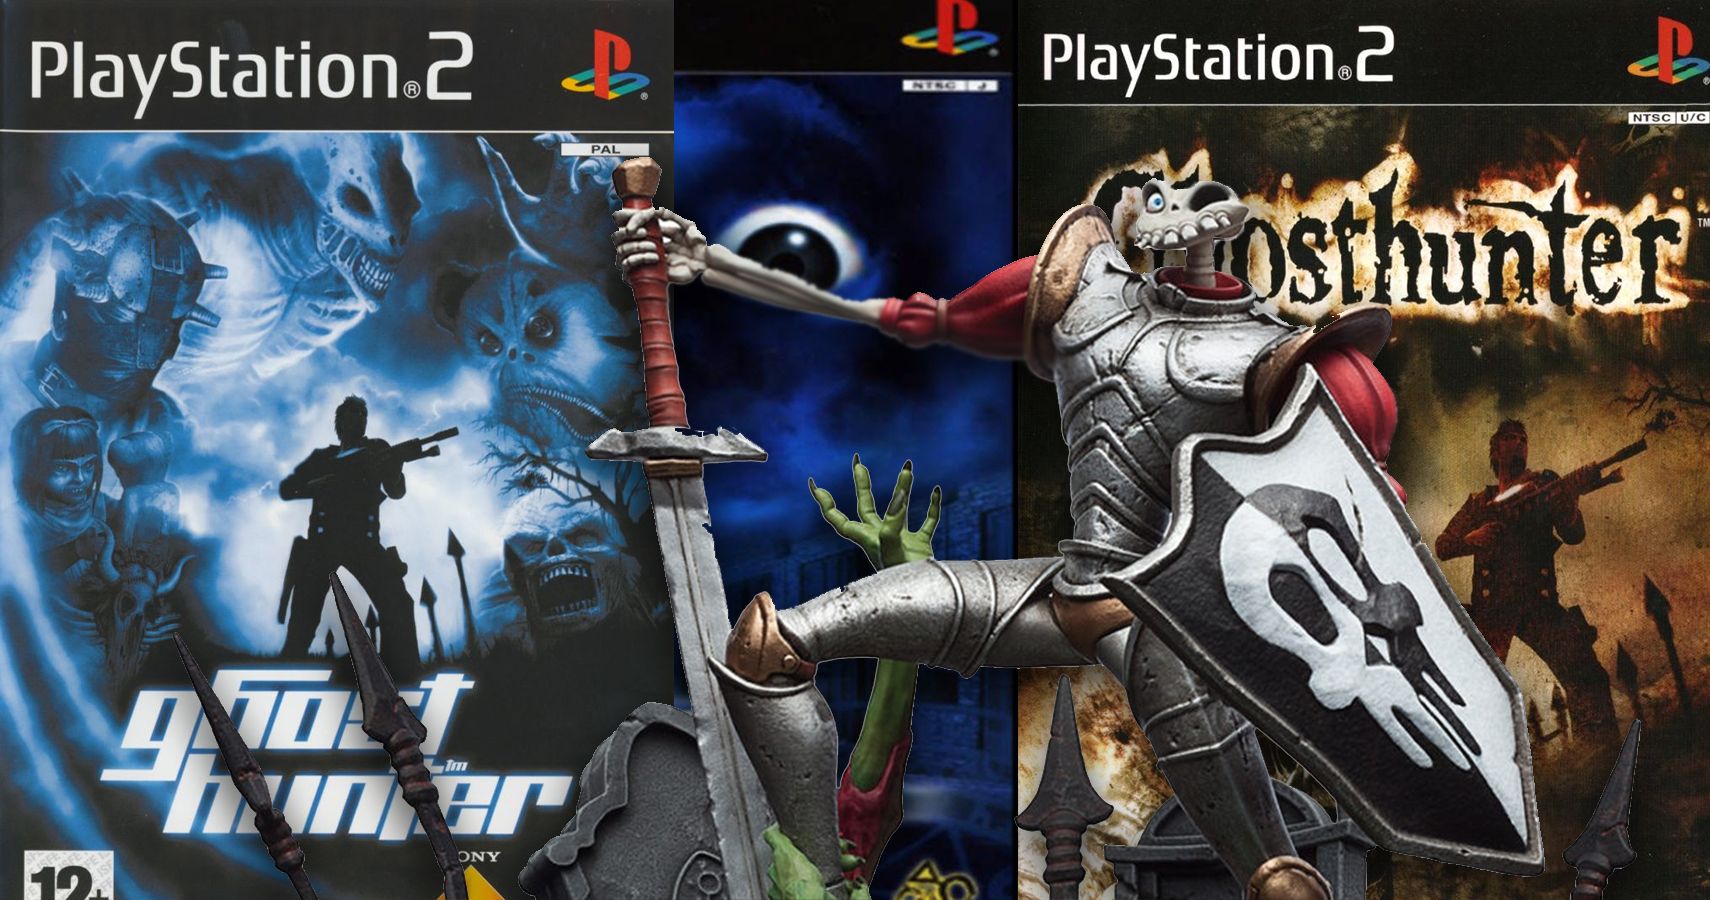 Sir Dan from MediEvil in front of covers of Ps2 Game Ghost Hunter